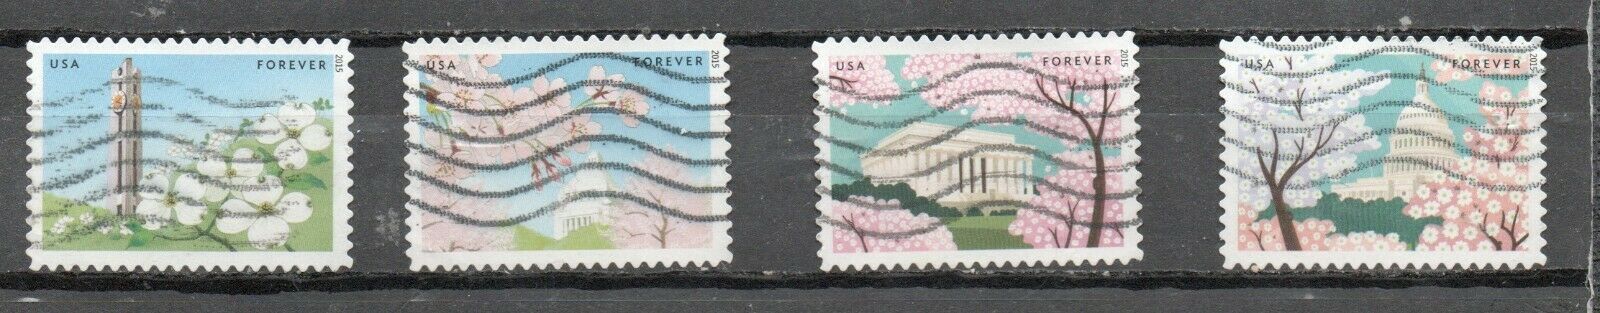 4982-85 Forever Gifts of Friendship, Set of 4 Used Singles #4982-5used